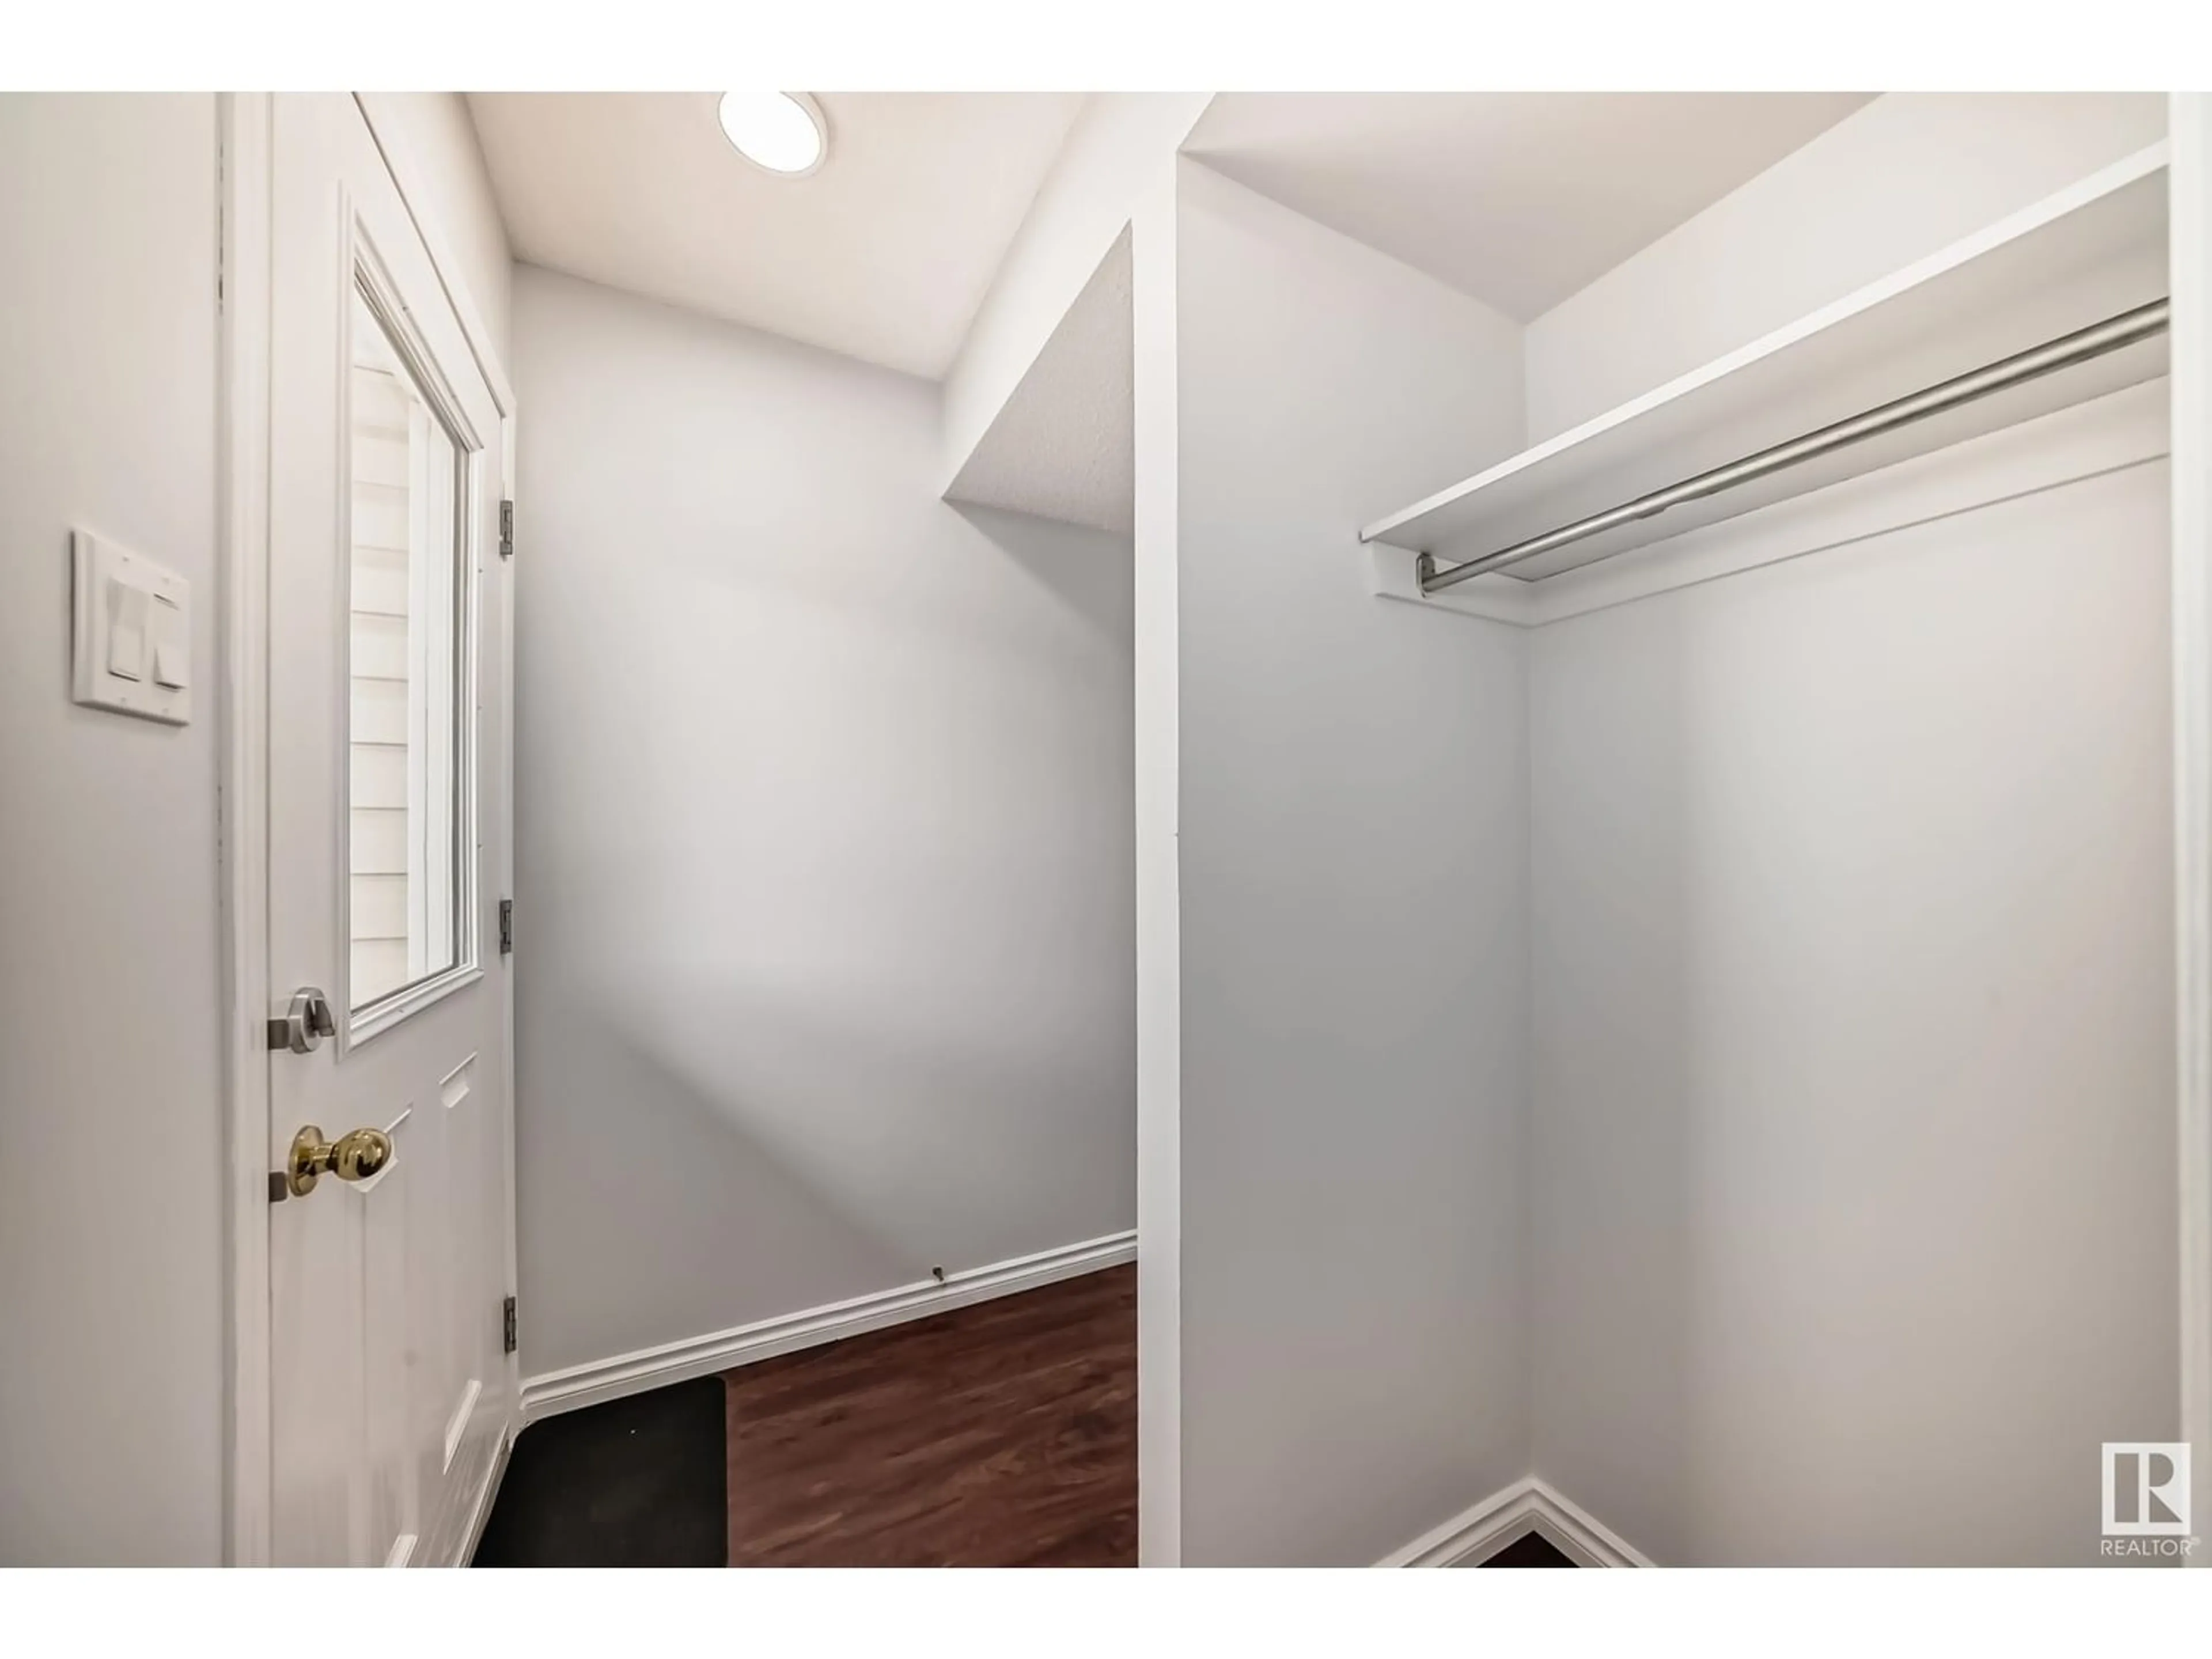 Storage room or clothes room or walk-in closet for 11502 139 AV NW, Edmonton Alberta T5X3L4